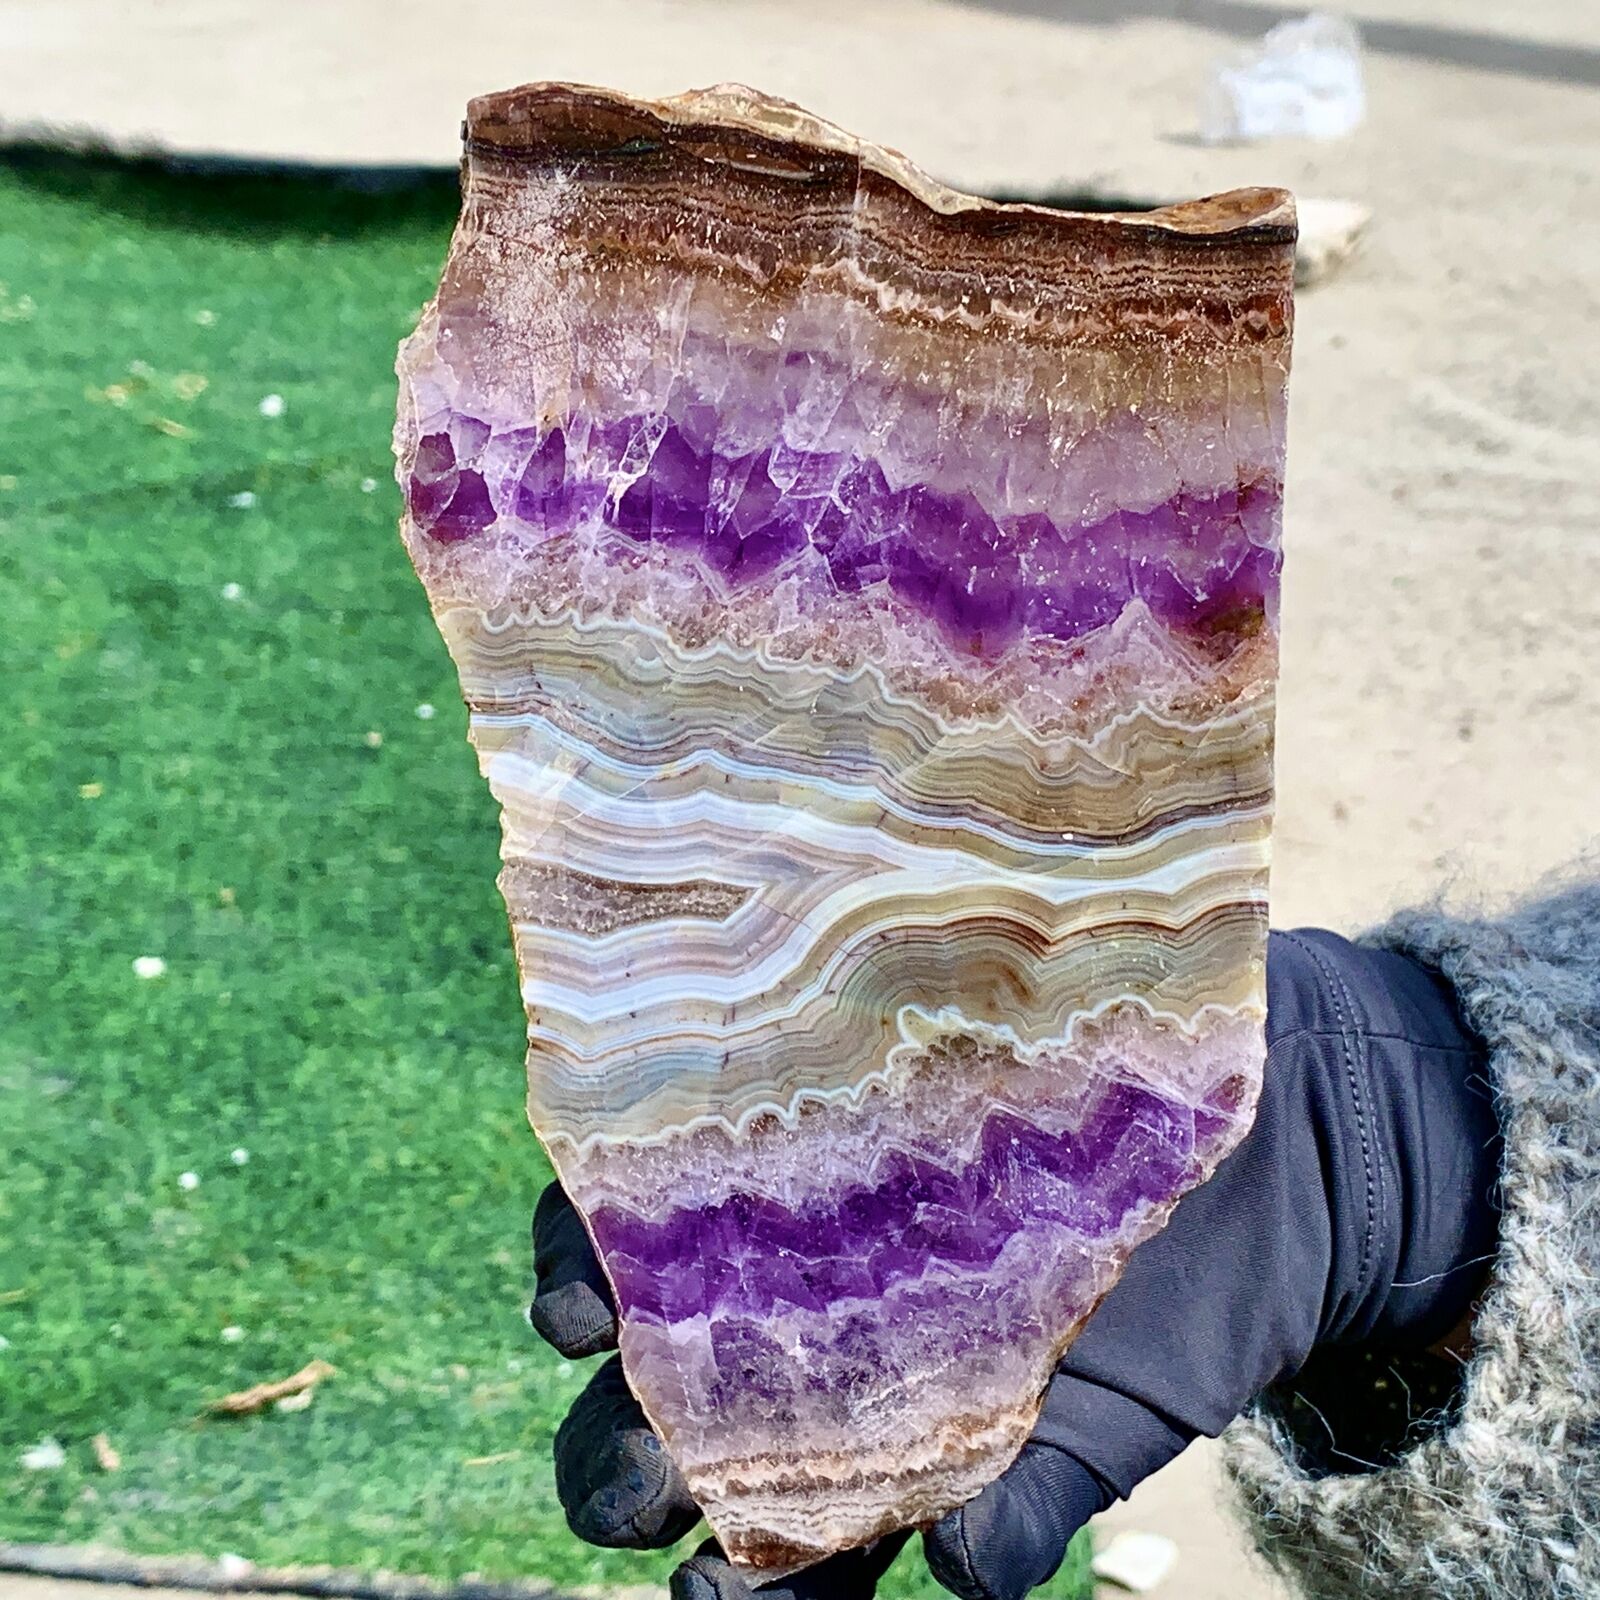 287G Natural and beautiful dream amethyst rough stone slab specimen